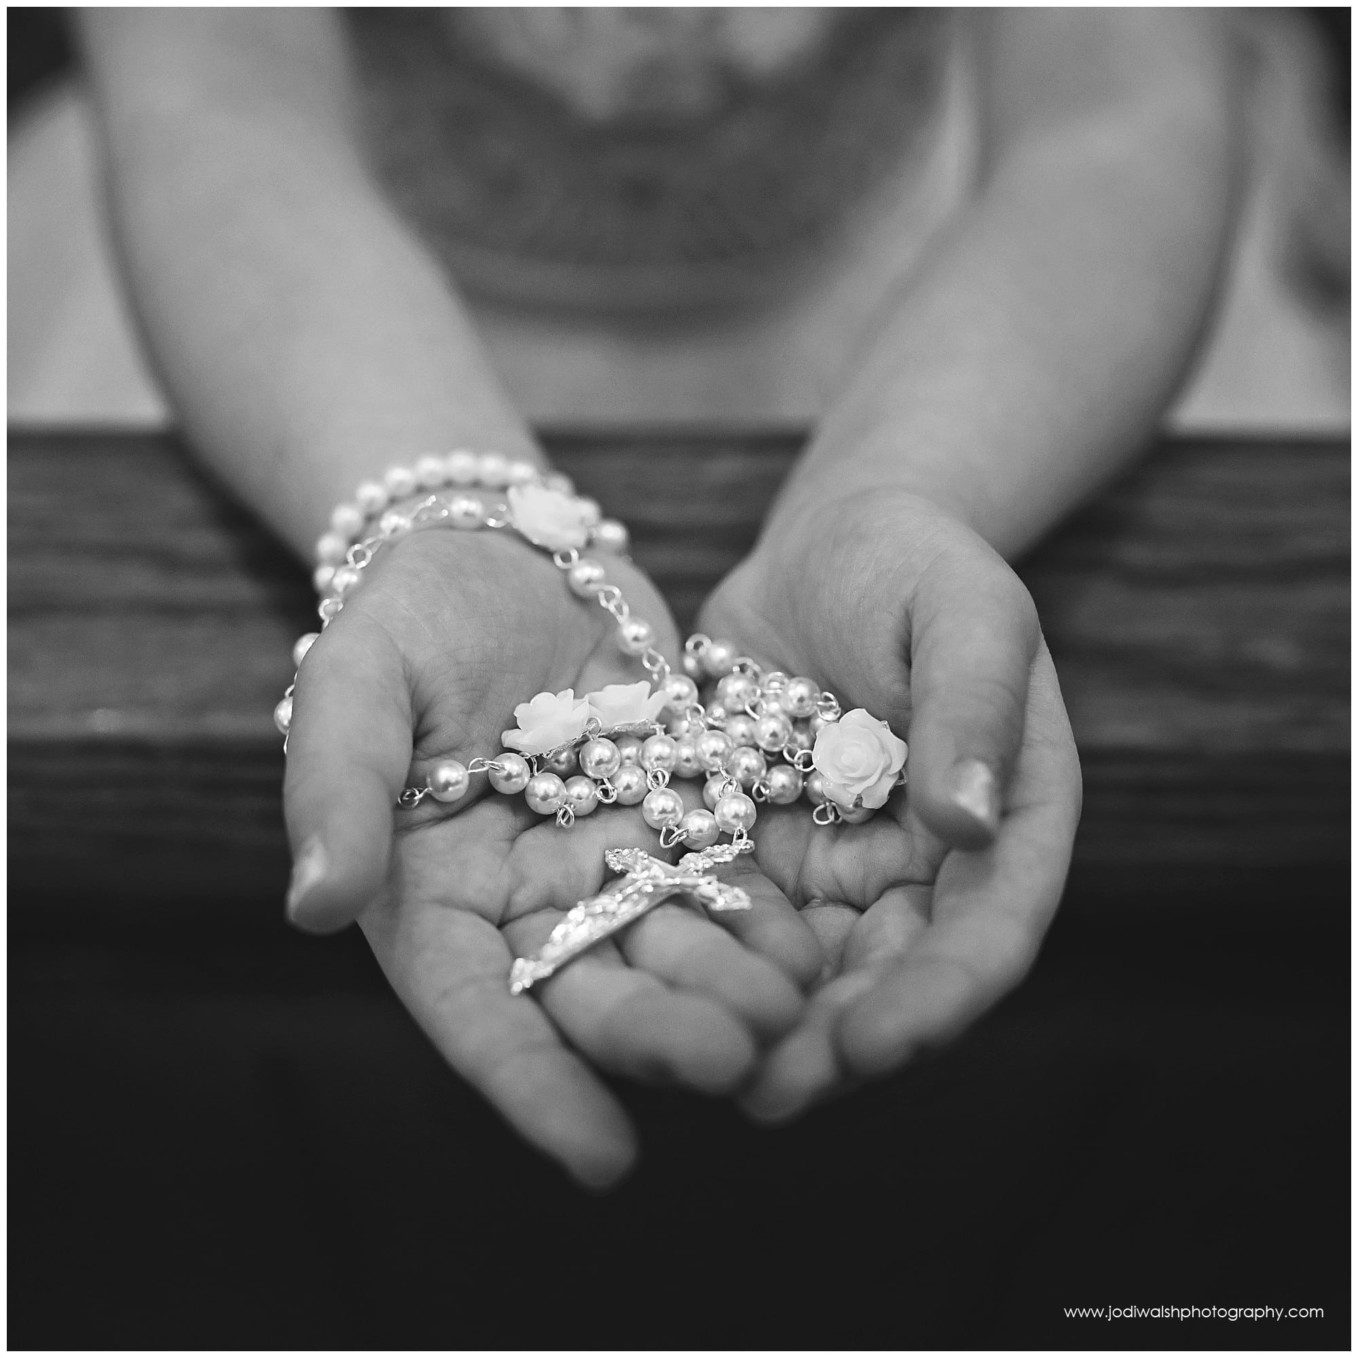 black and white image of white rosary beads in a little girl's hands